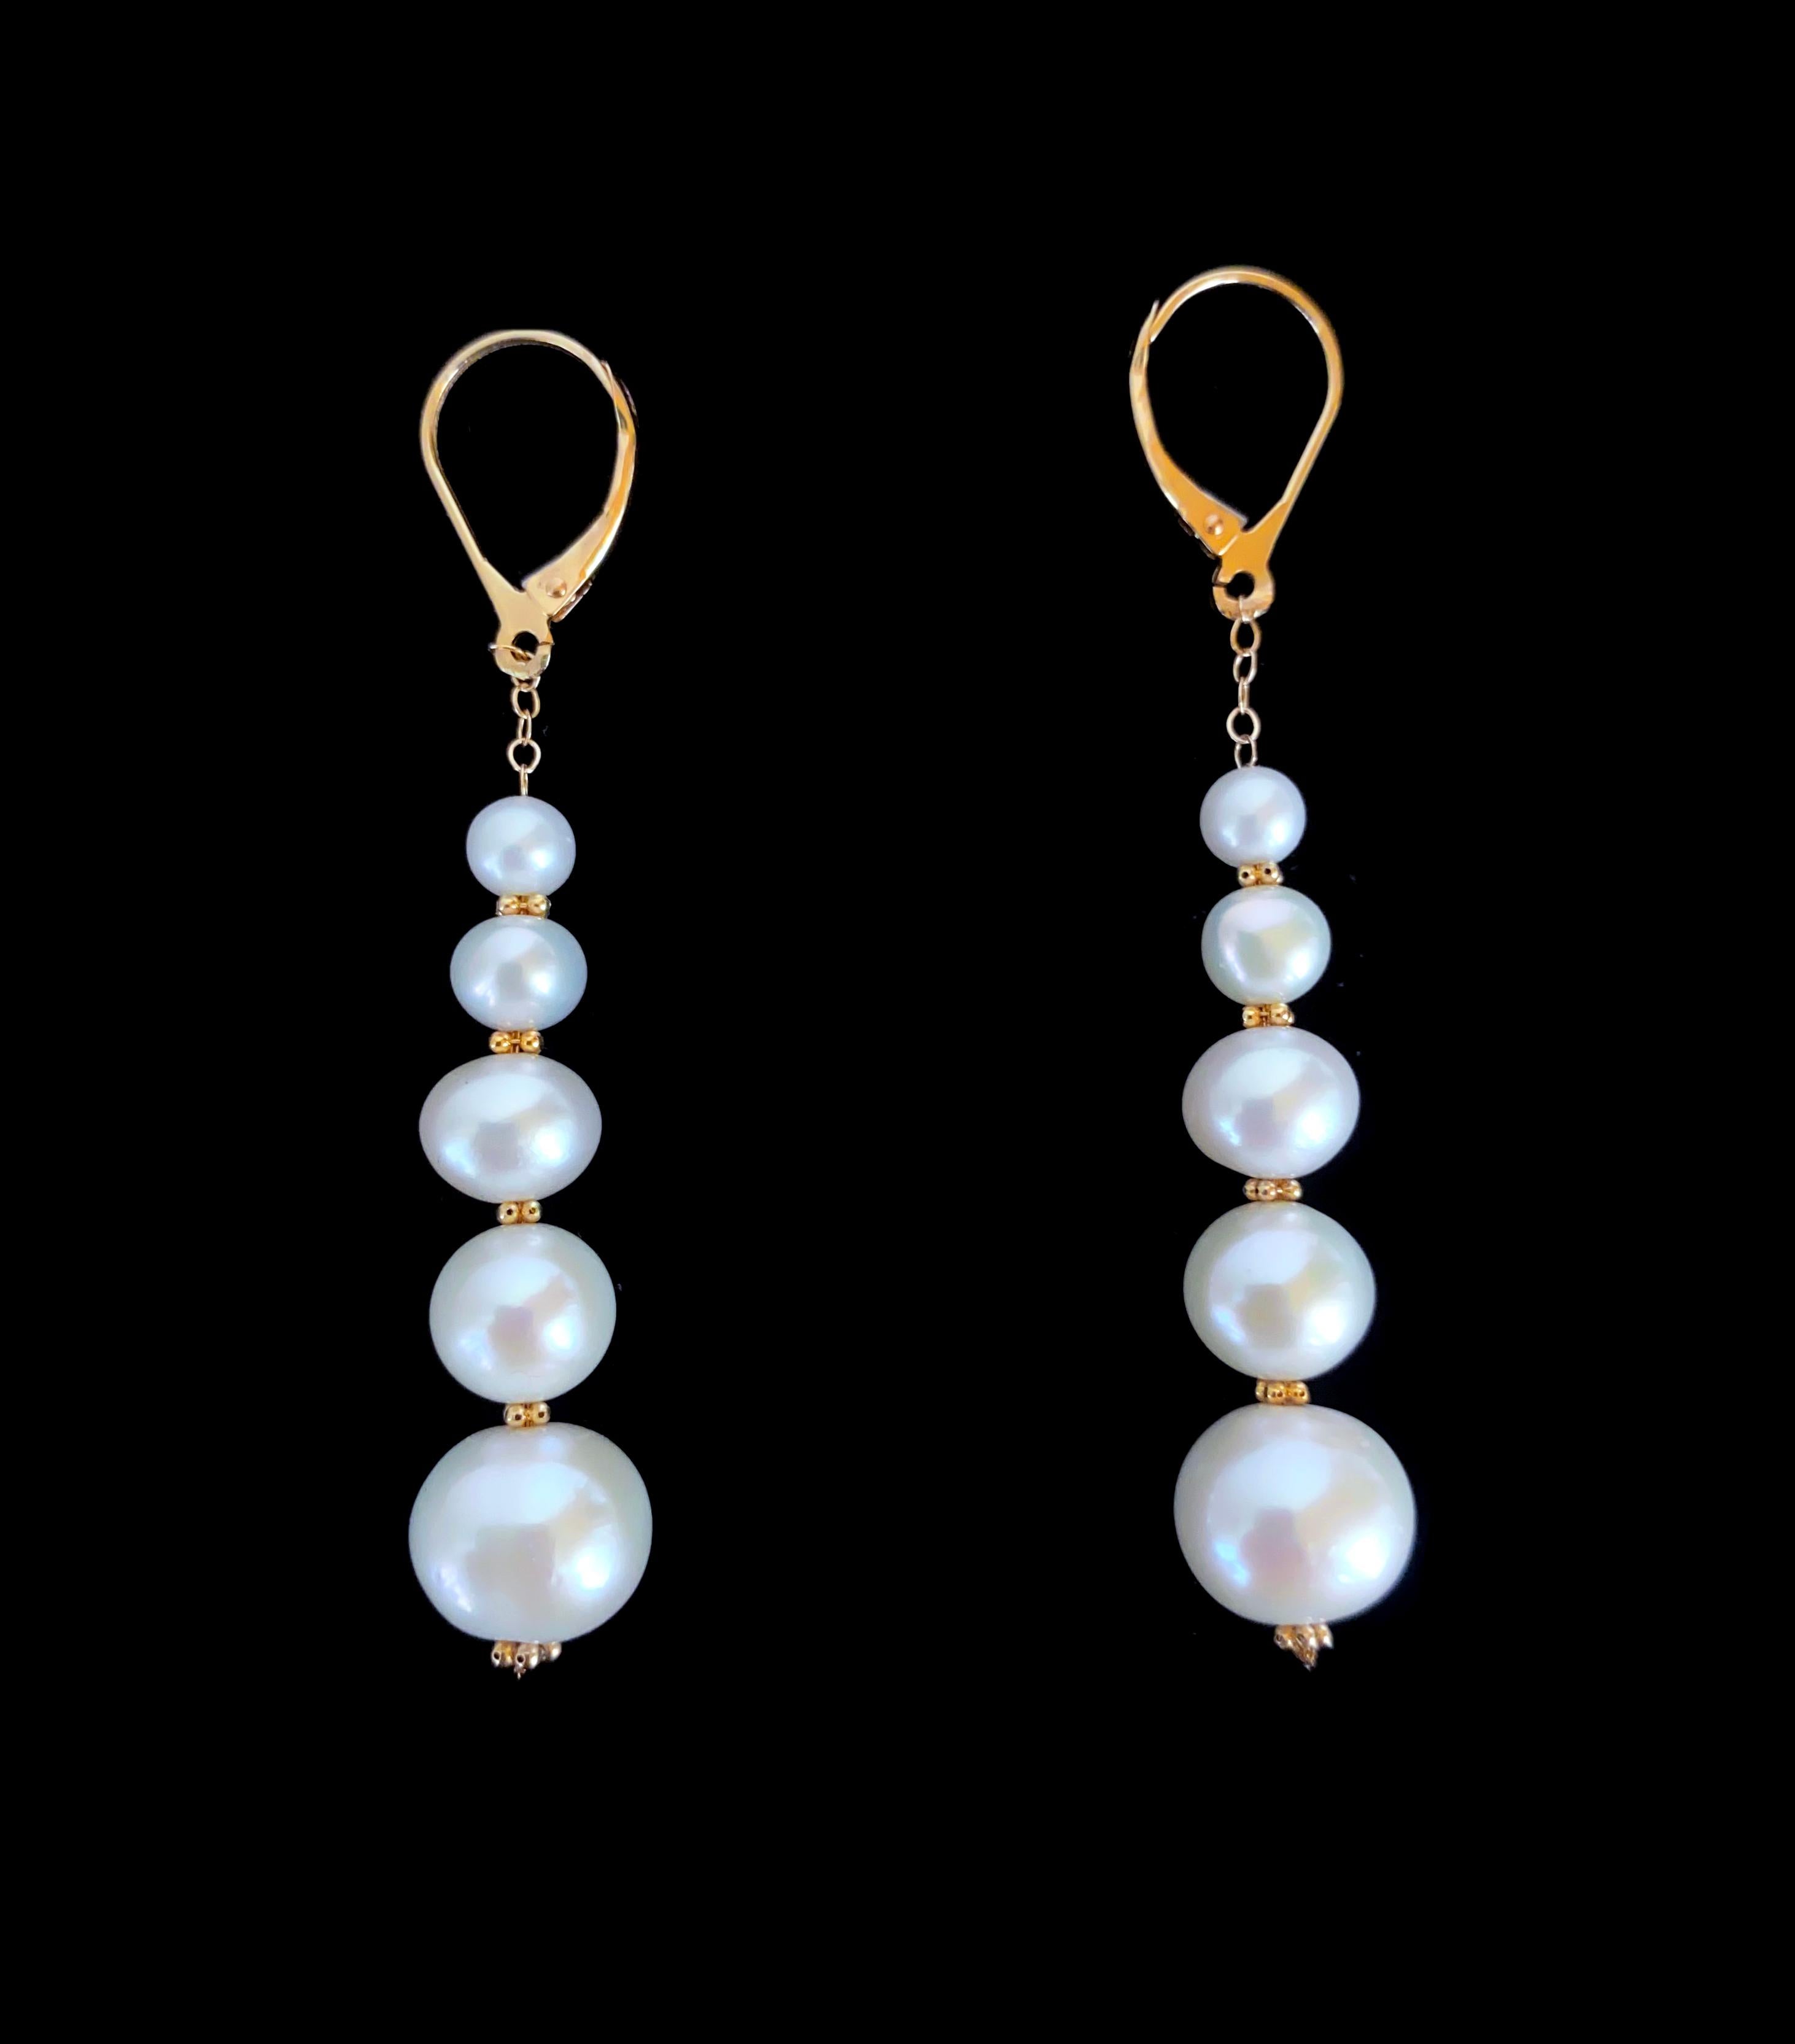 Beautiful pair of Earrings by Marina J. This pair is made with all solid 14k Yellow Gold Wiring and Chain.  Five cultured white Pearls with a soft iridescent luster perfectly complimented by the gold, hang off a solid 14k Yellow Gold chain. The